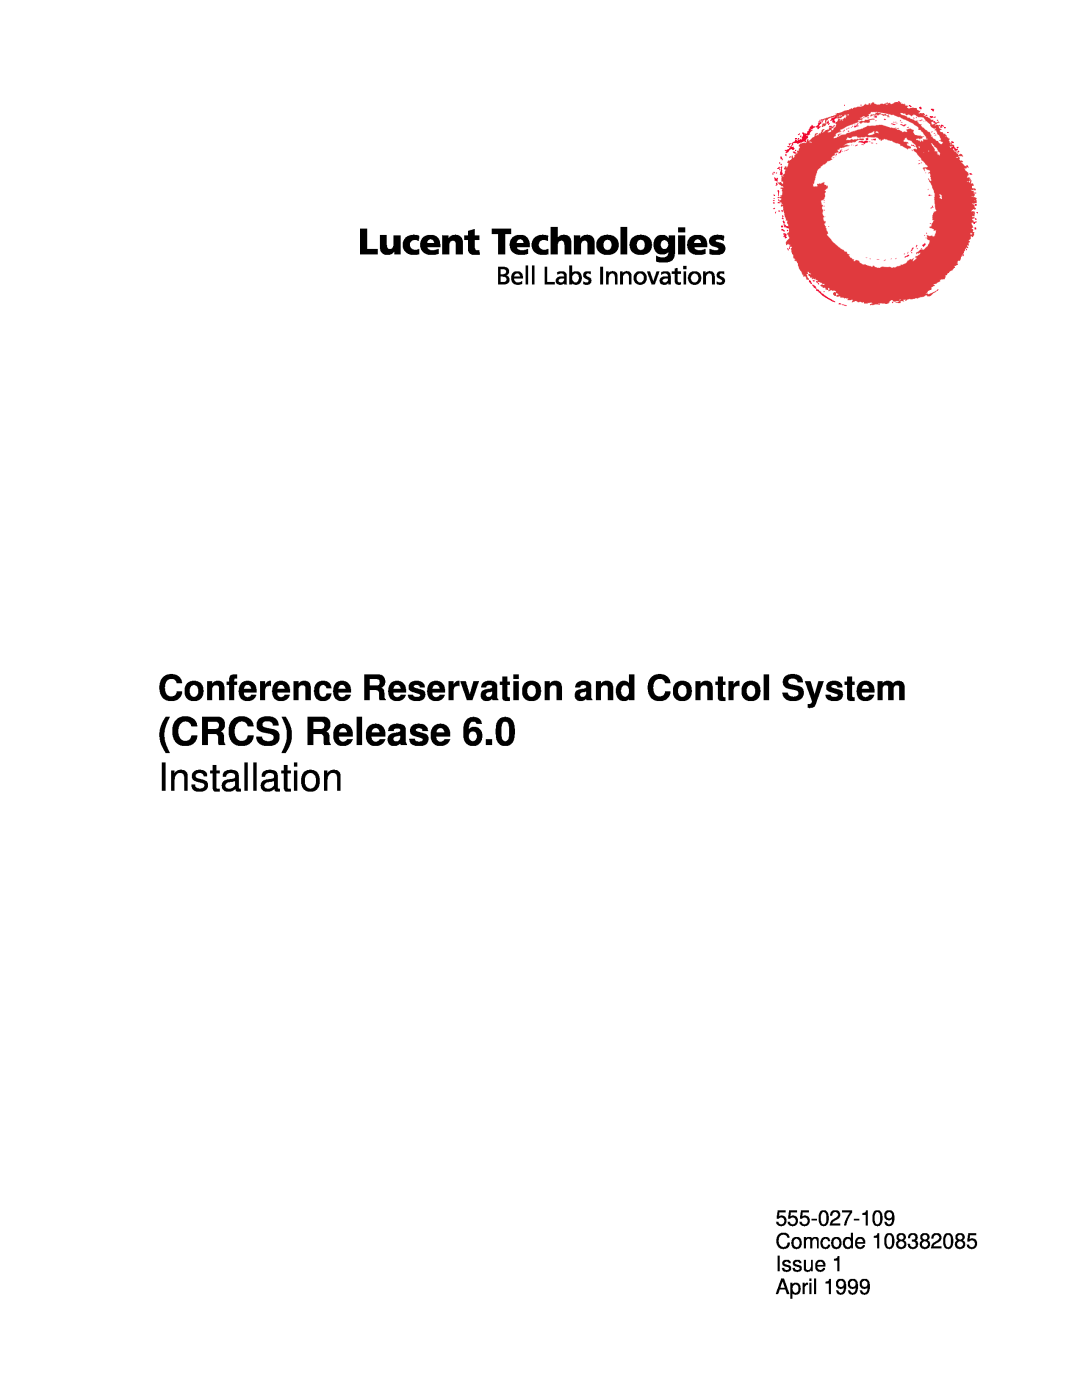 Lucent Technologies 6 manual 555-027-109Comcode 108382085 Issue April, CRCS Release, Installation 